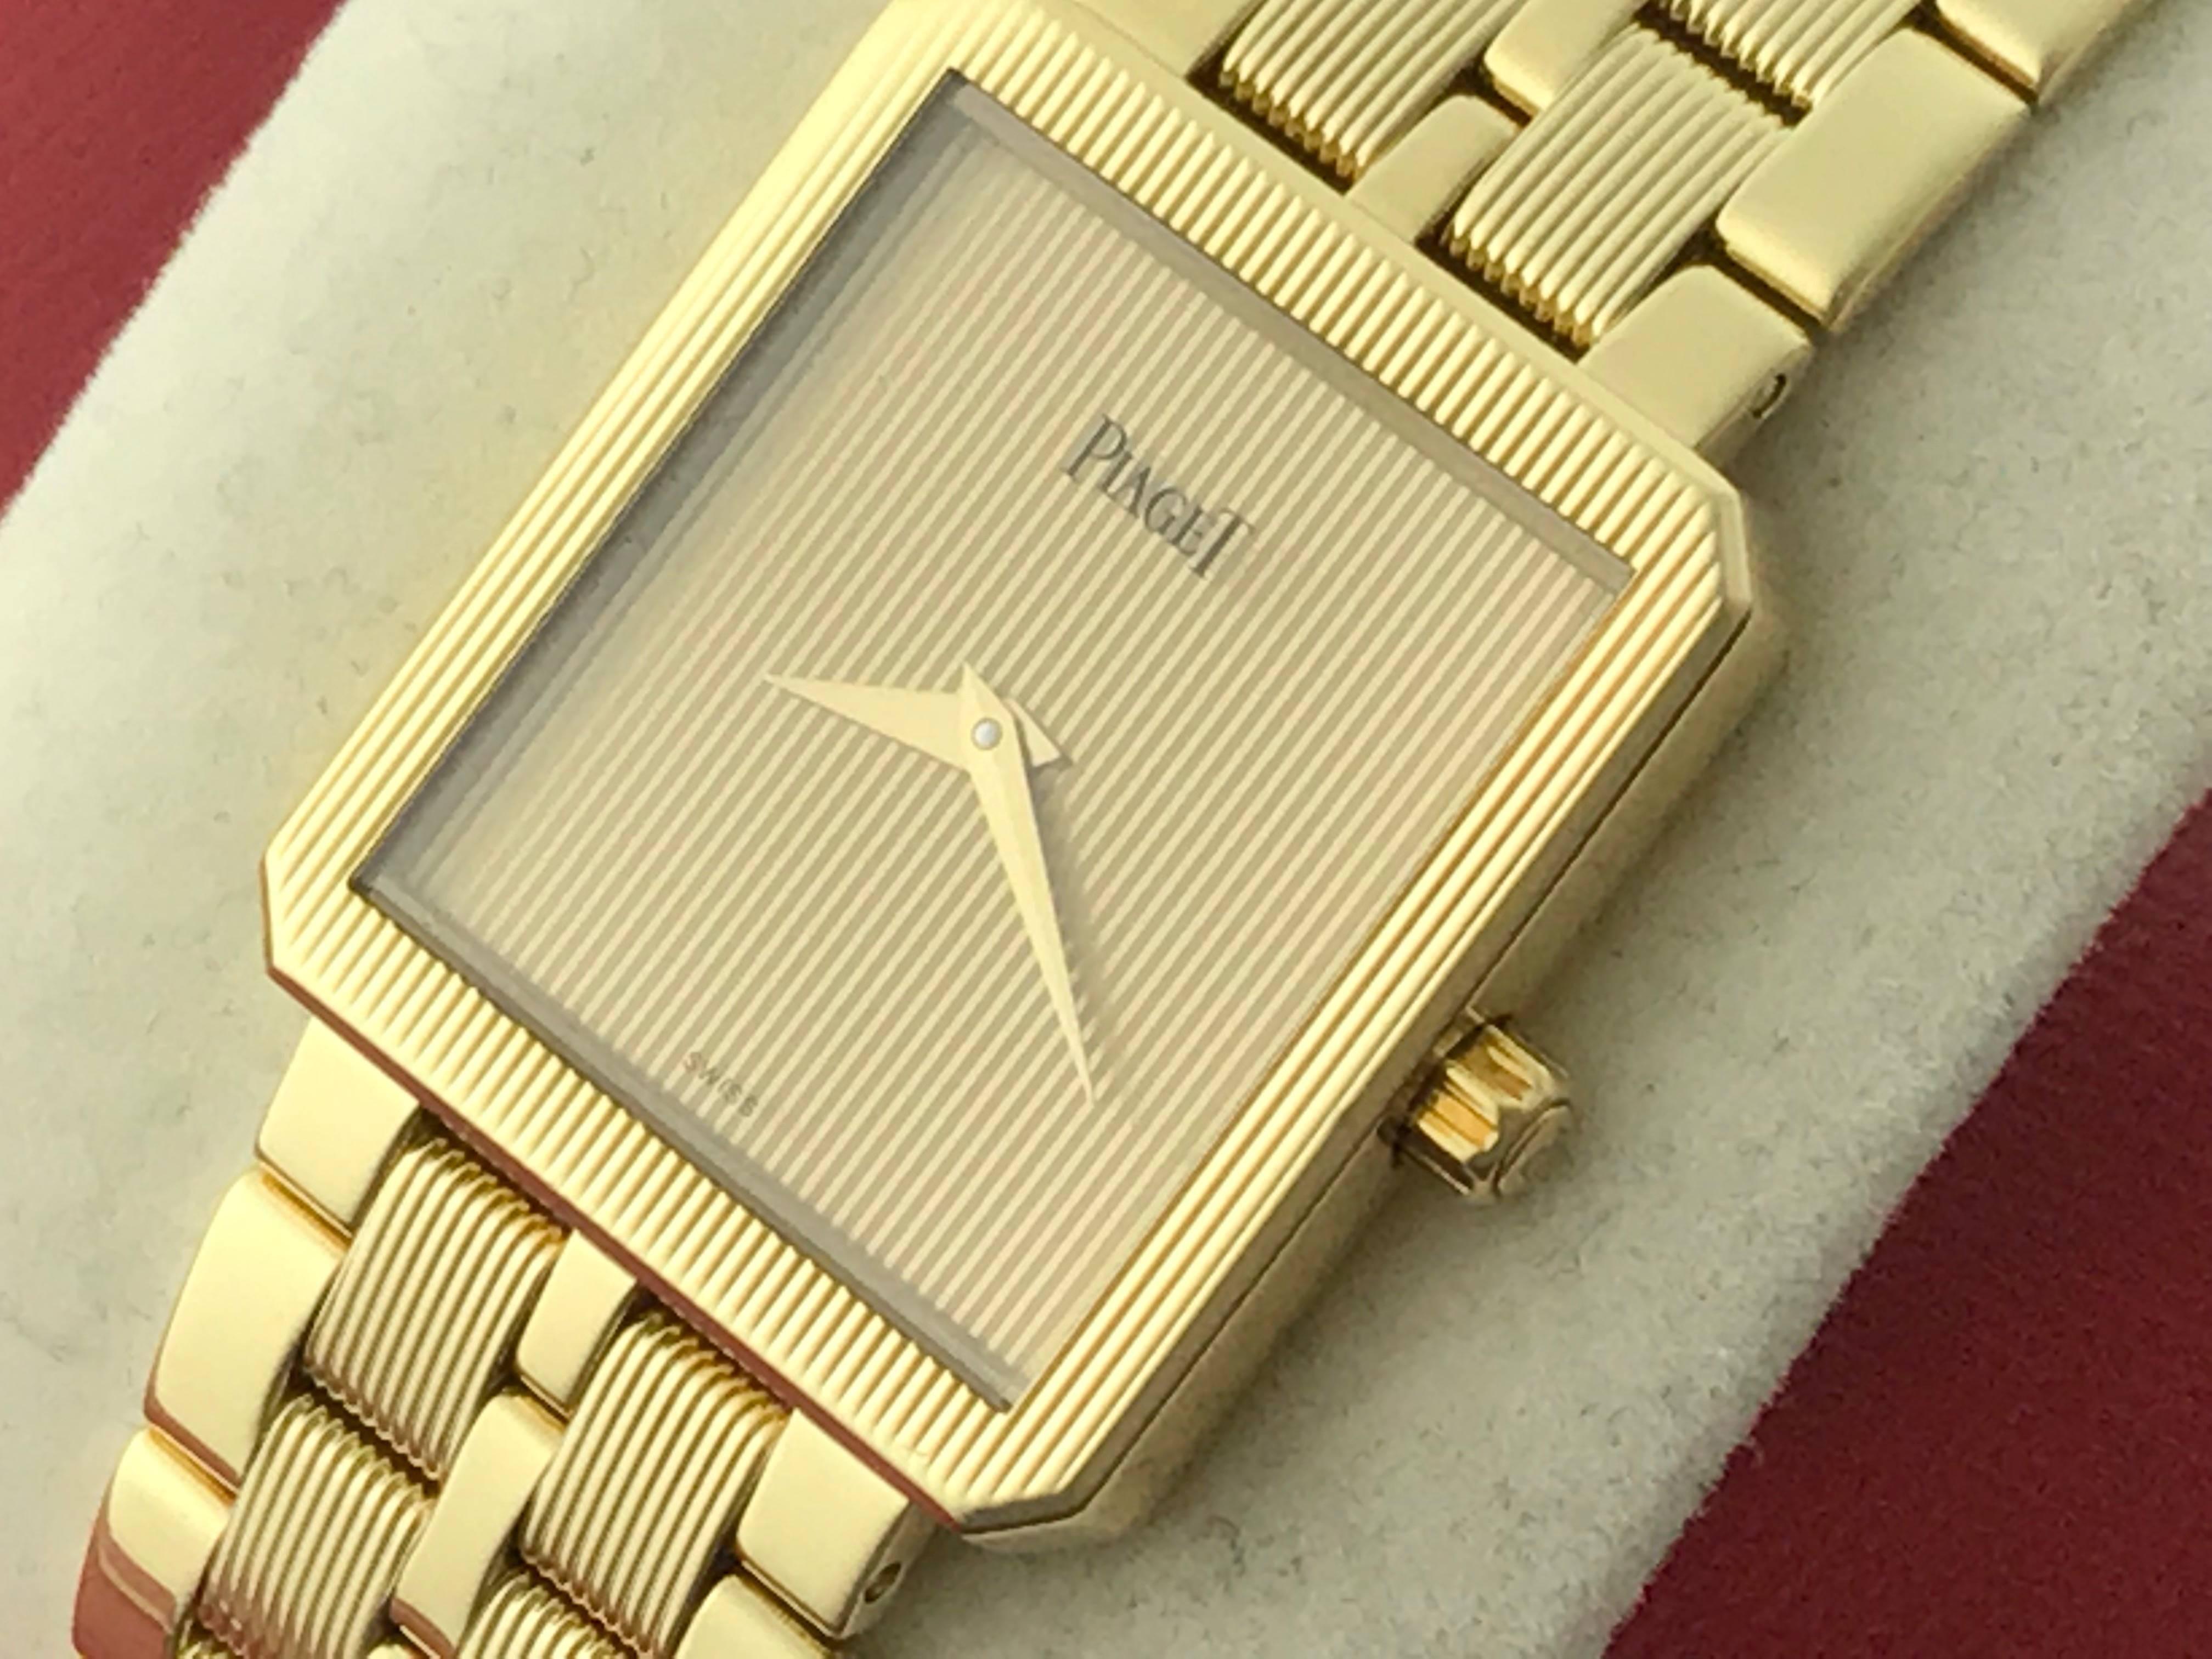 Piaget Protocole Midsize 18k yellow gold quartz wrist watch. Model 50154M601D. 18k Yellow Gold rectangular style case (24x28mm), 18k Yellow Gold Piaget bracelet with deployant clasp, Gold Dial. Certified Pre Owned and ready to ship! Piaget original